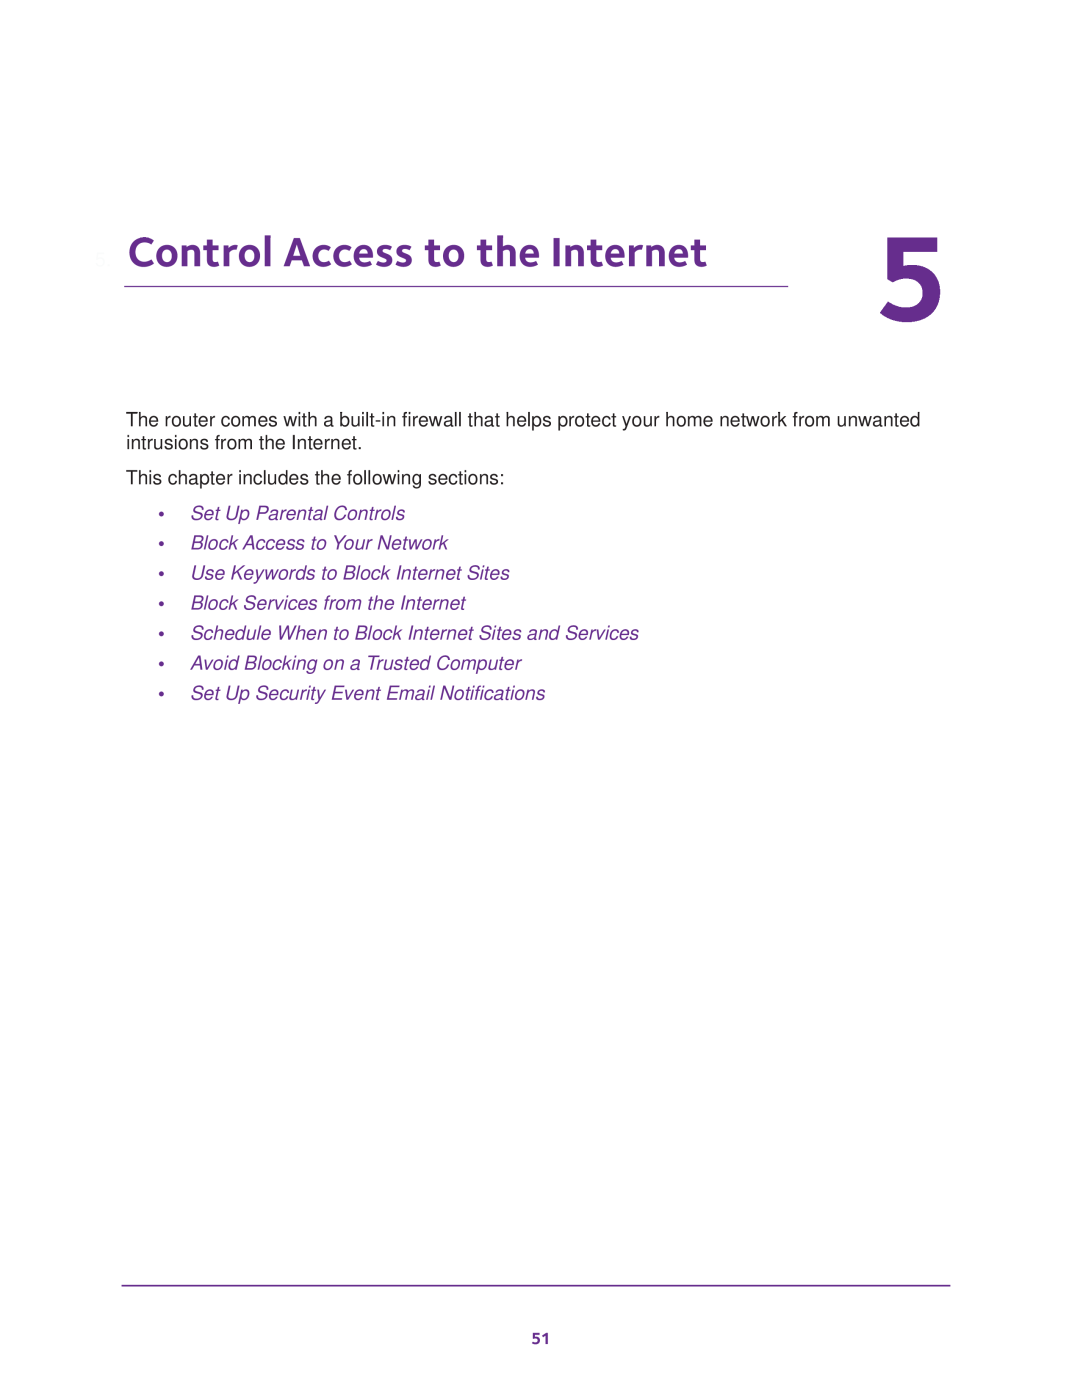 NETGEAR Model R7000 user manual Control Access to the Internet, Set Up Parental Controls Block Access to Your Network 